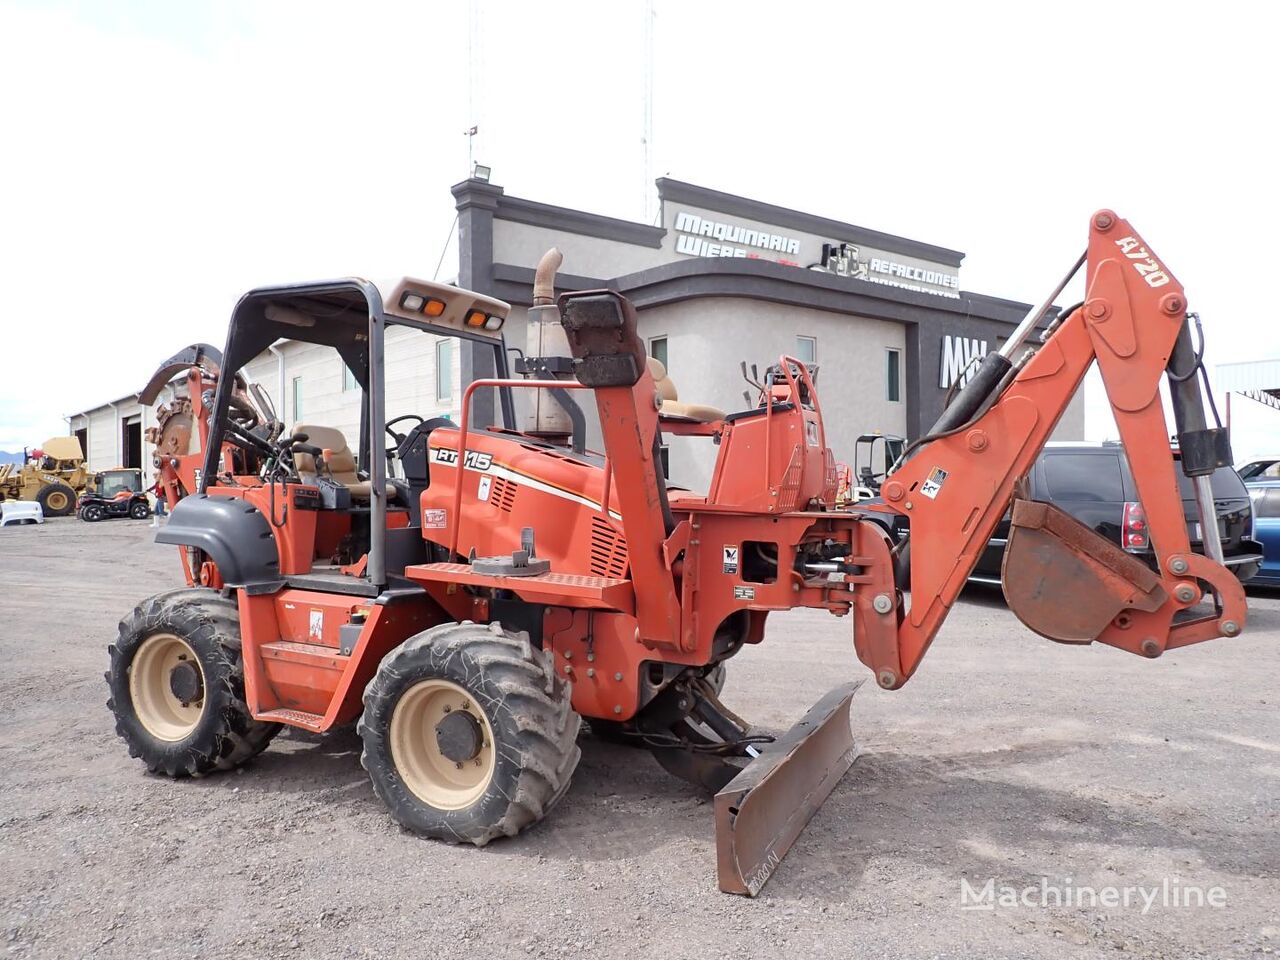 Ditch-Witch DITCH WITCH RT115H trencher